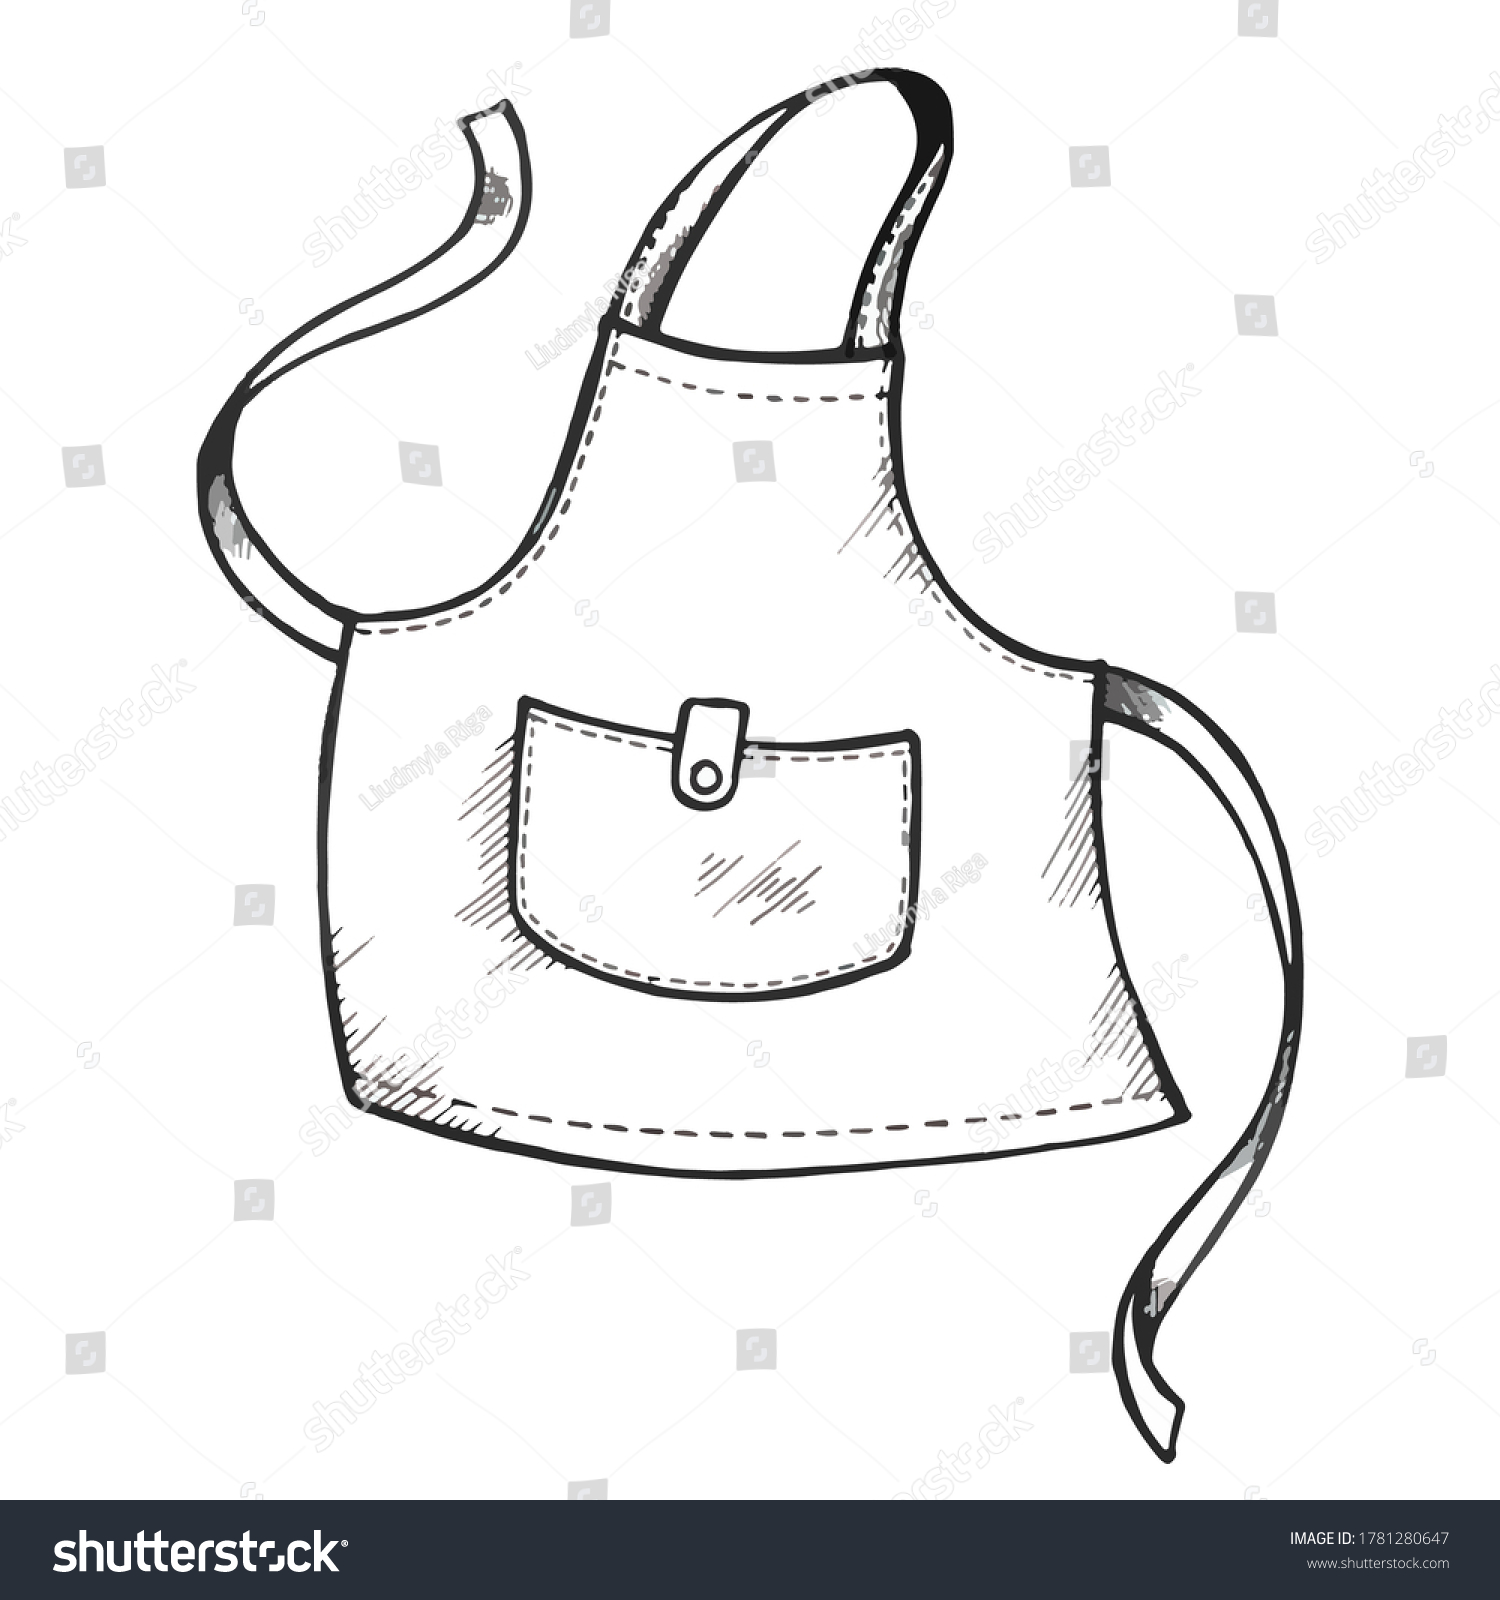 Hand drawing apron Images, Stock Photos & Vectors   Shutterstock